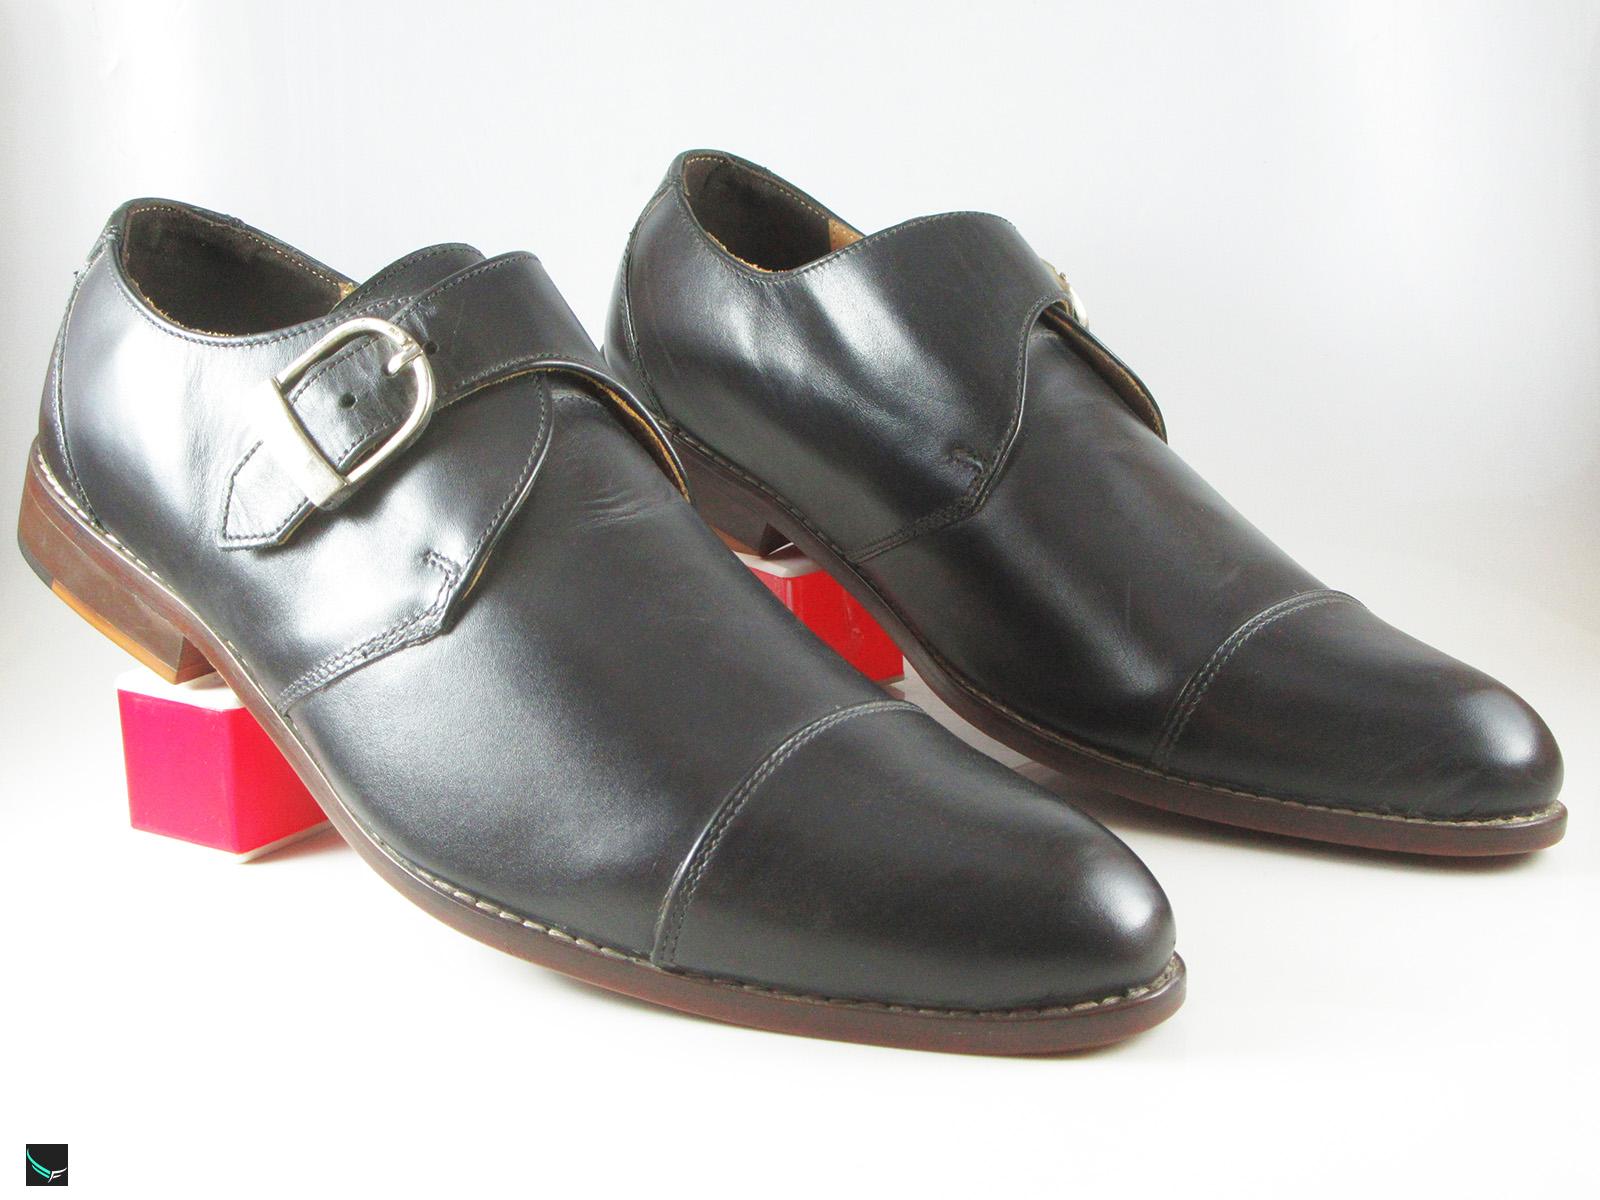 Formal Single Monk With Toecap Leather Shoe - 4735 - Leather ...